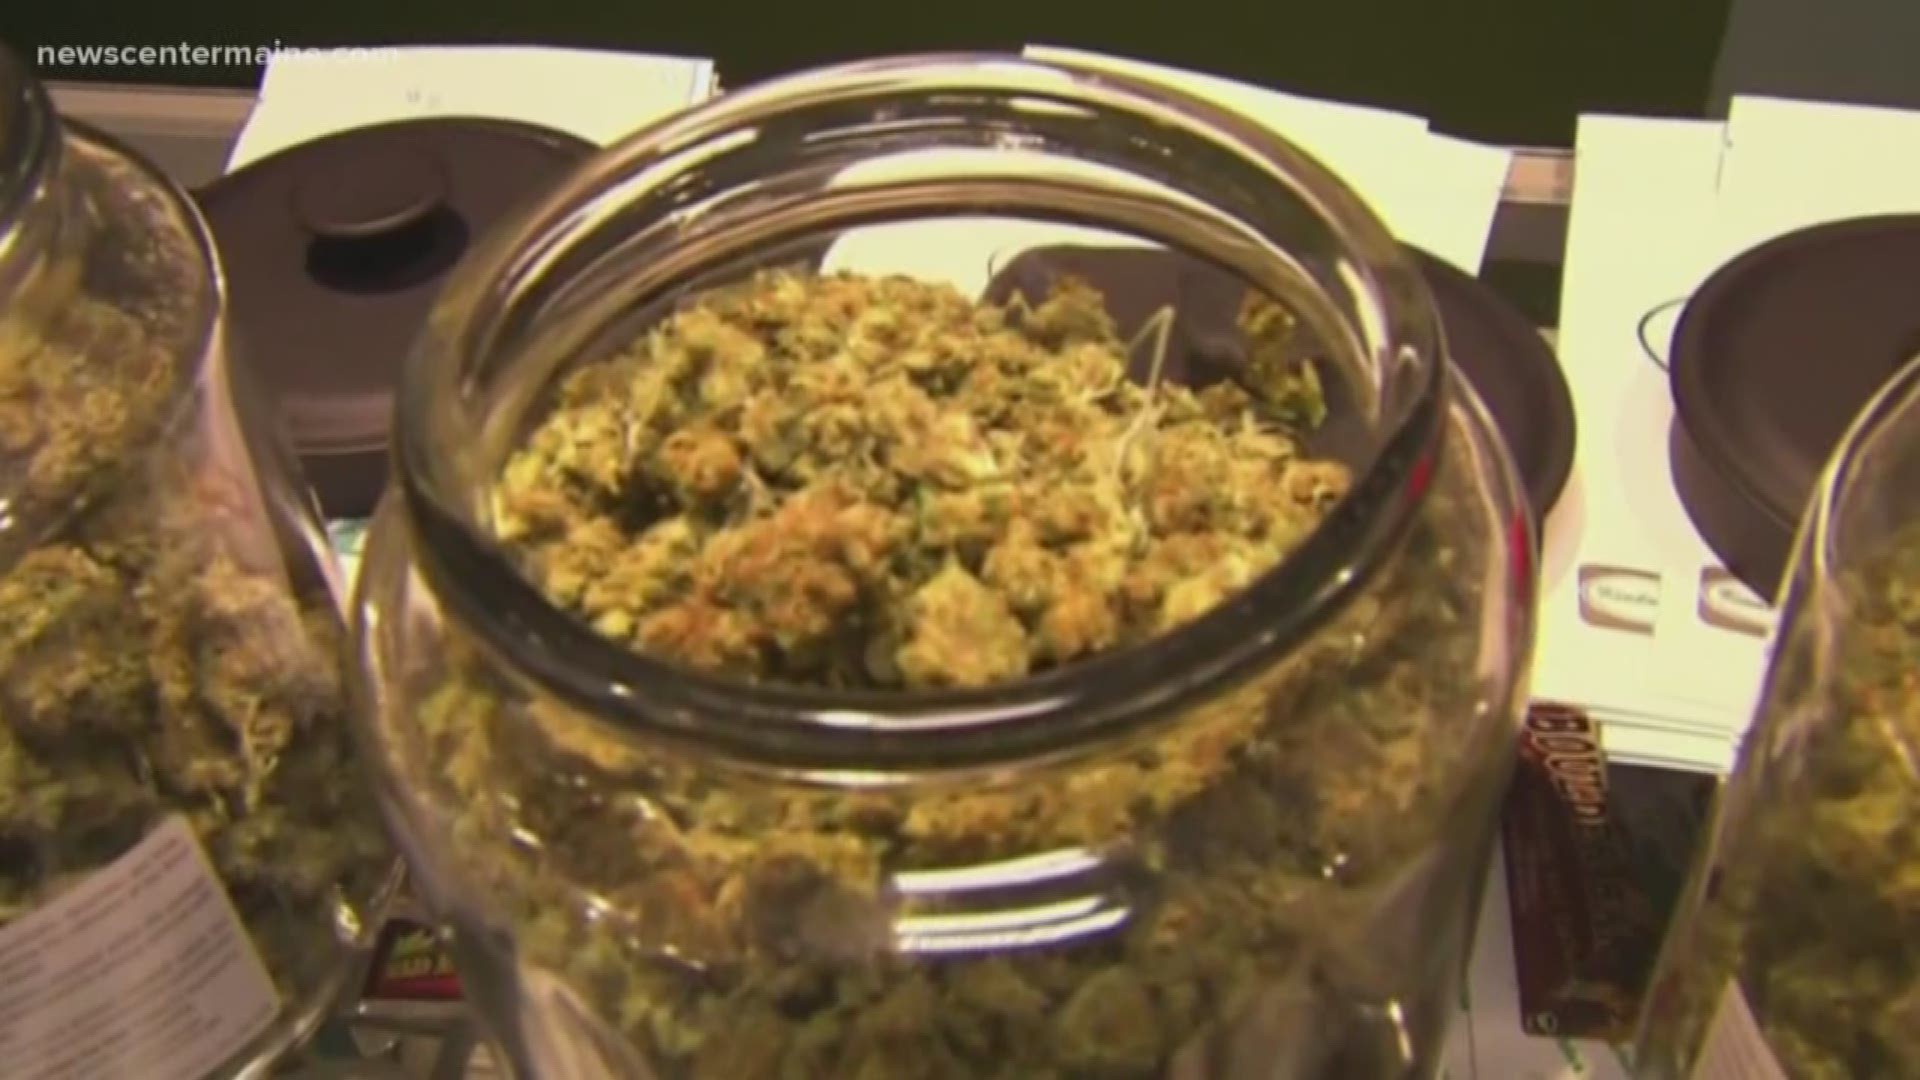 The Office of Marijuana Policy is expected to open up the application process for business owners Thursday.